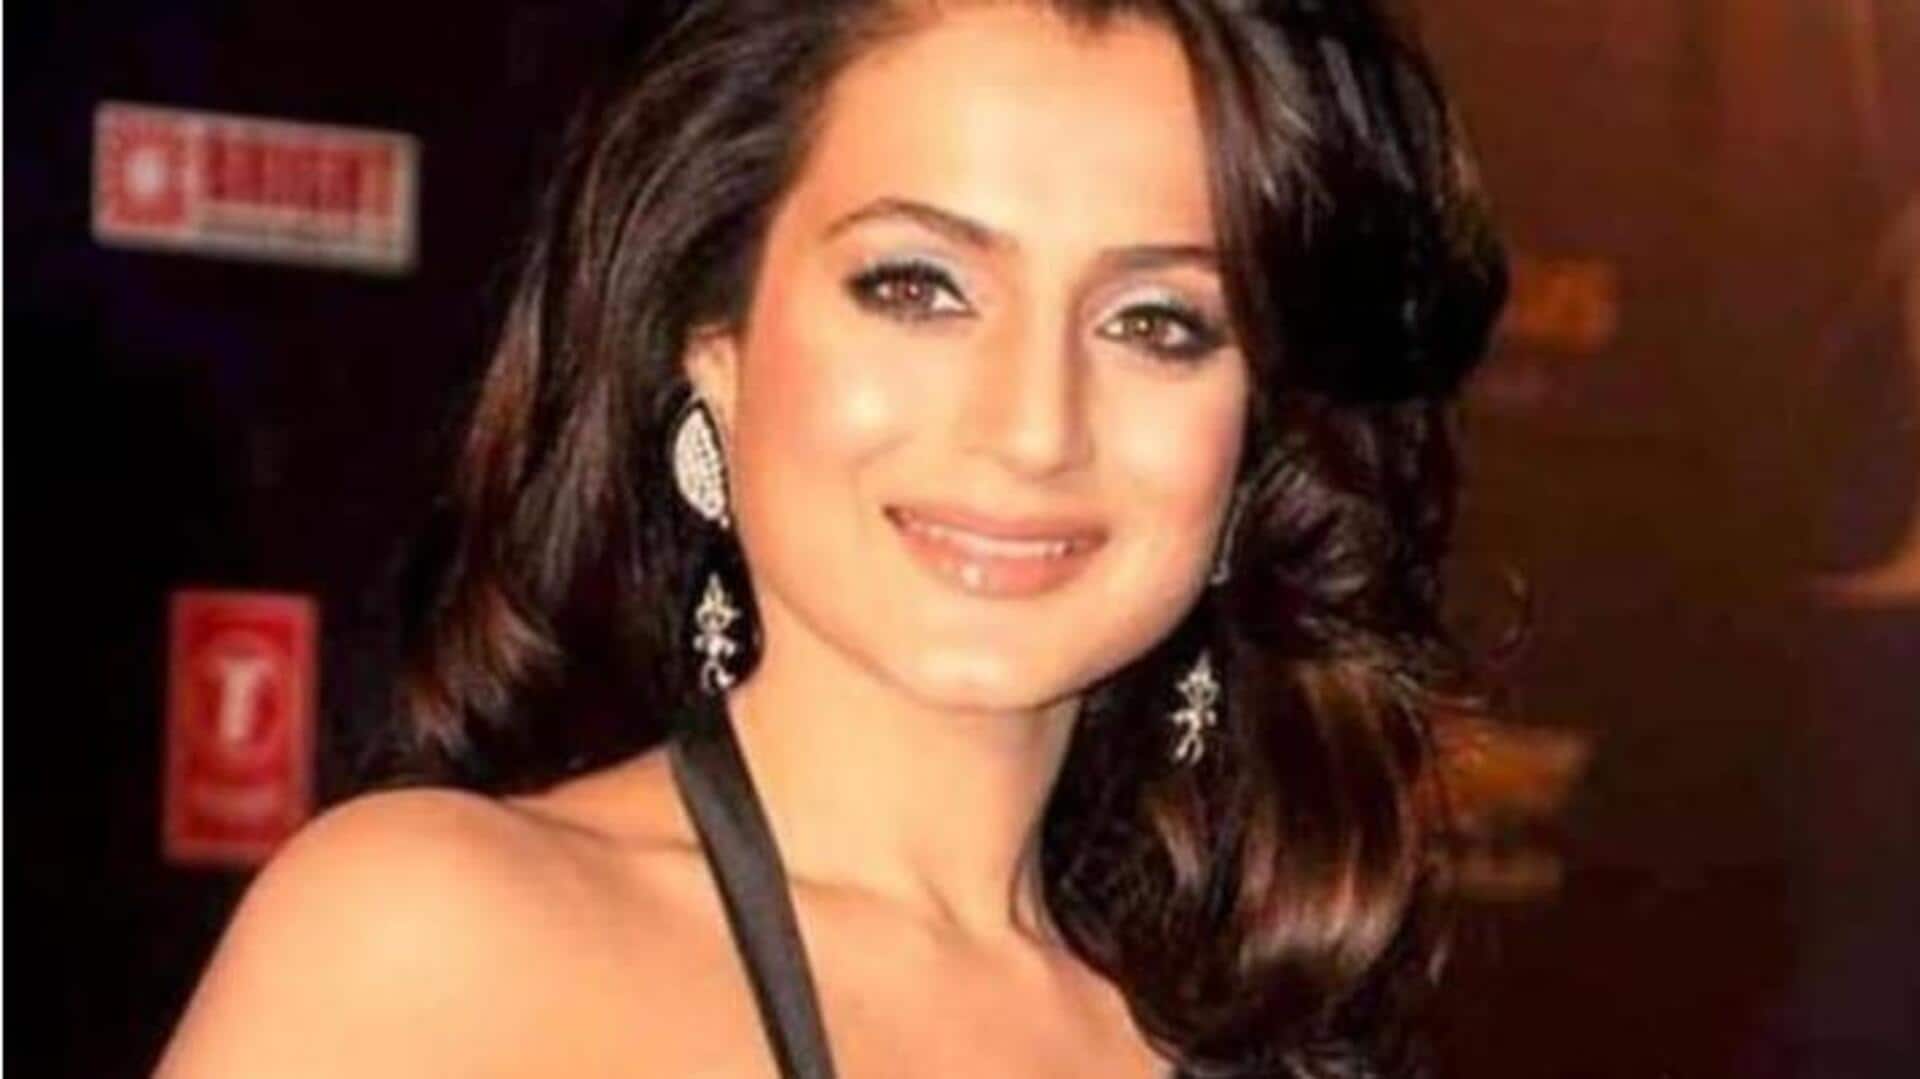 Controversy's favorite child: Ameesha Patel's numerous objectionable comments